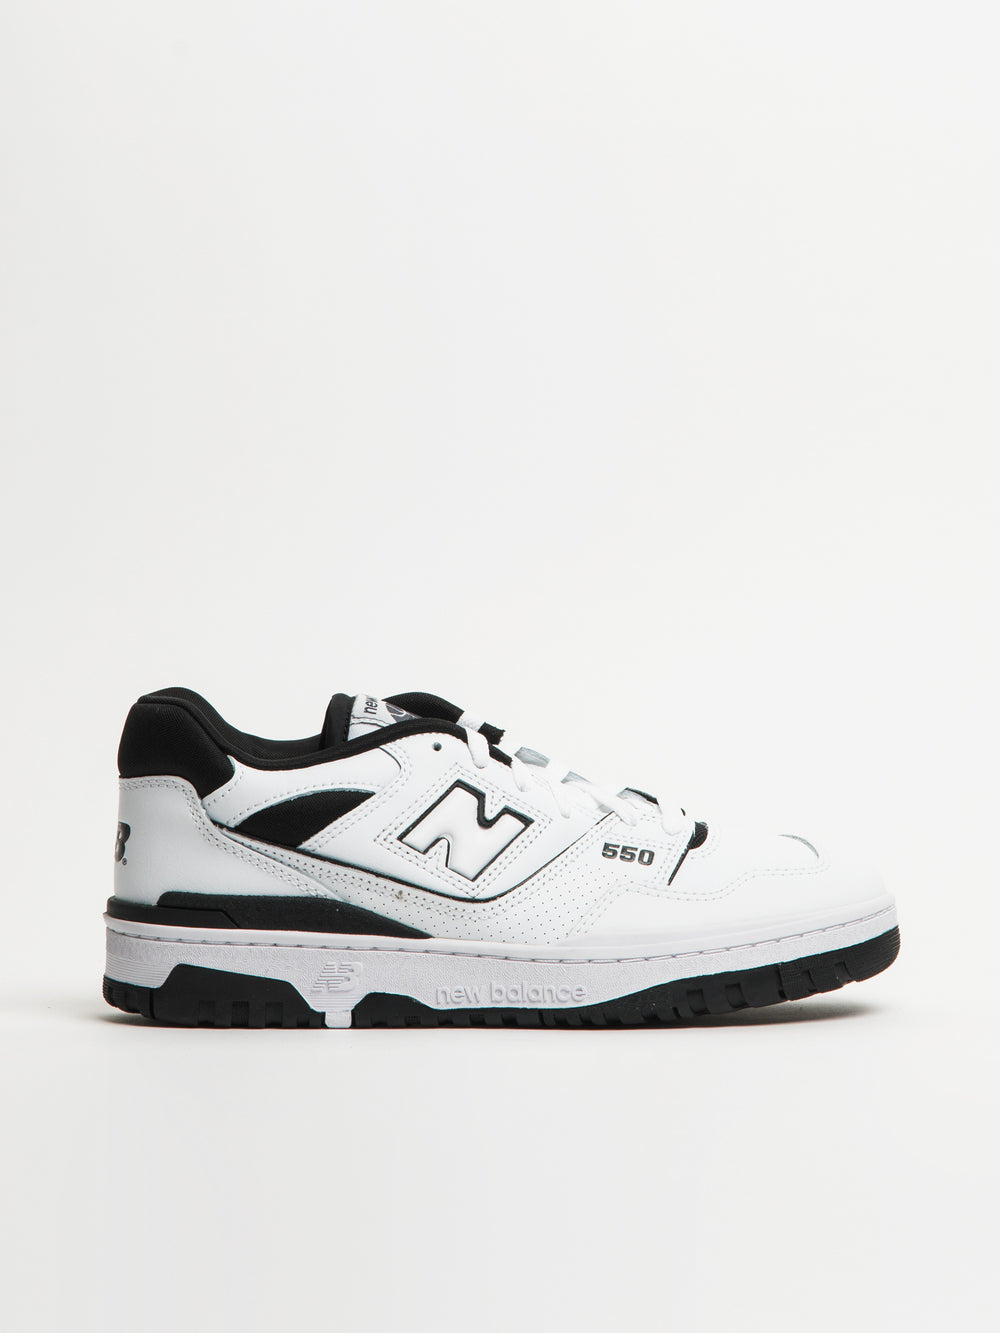 MENS NEW BALANCE THE BB550 SNEAKERS